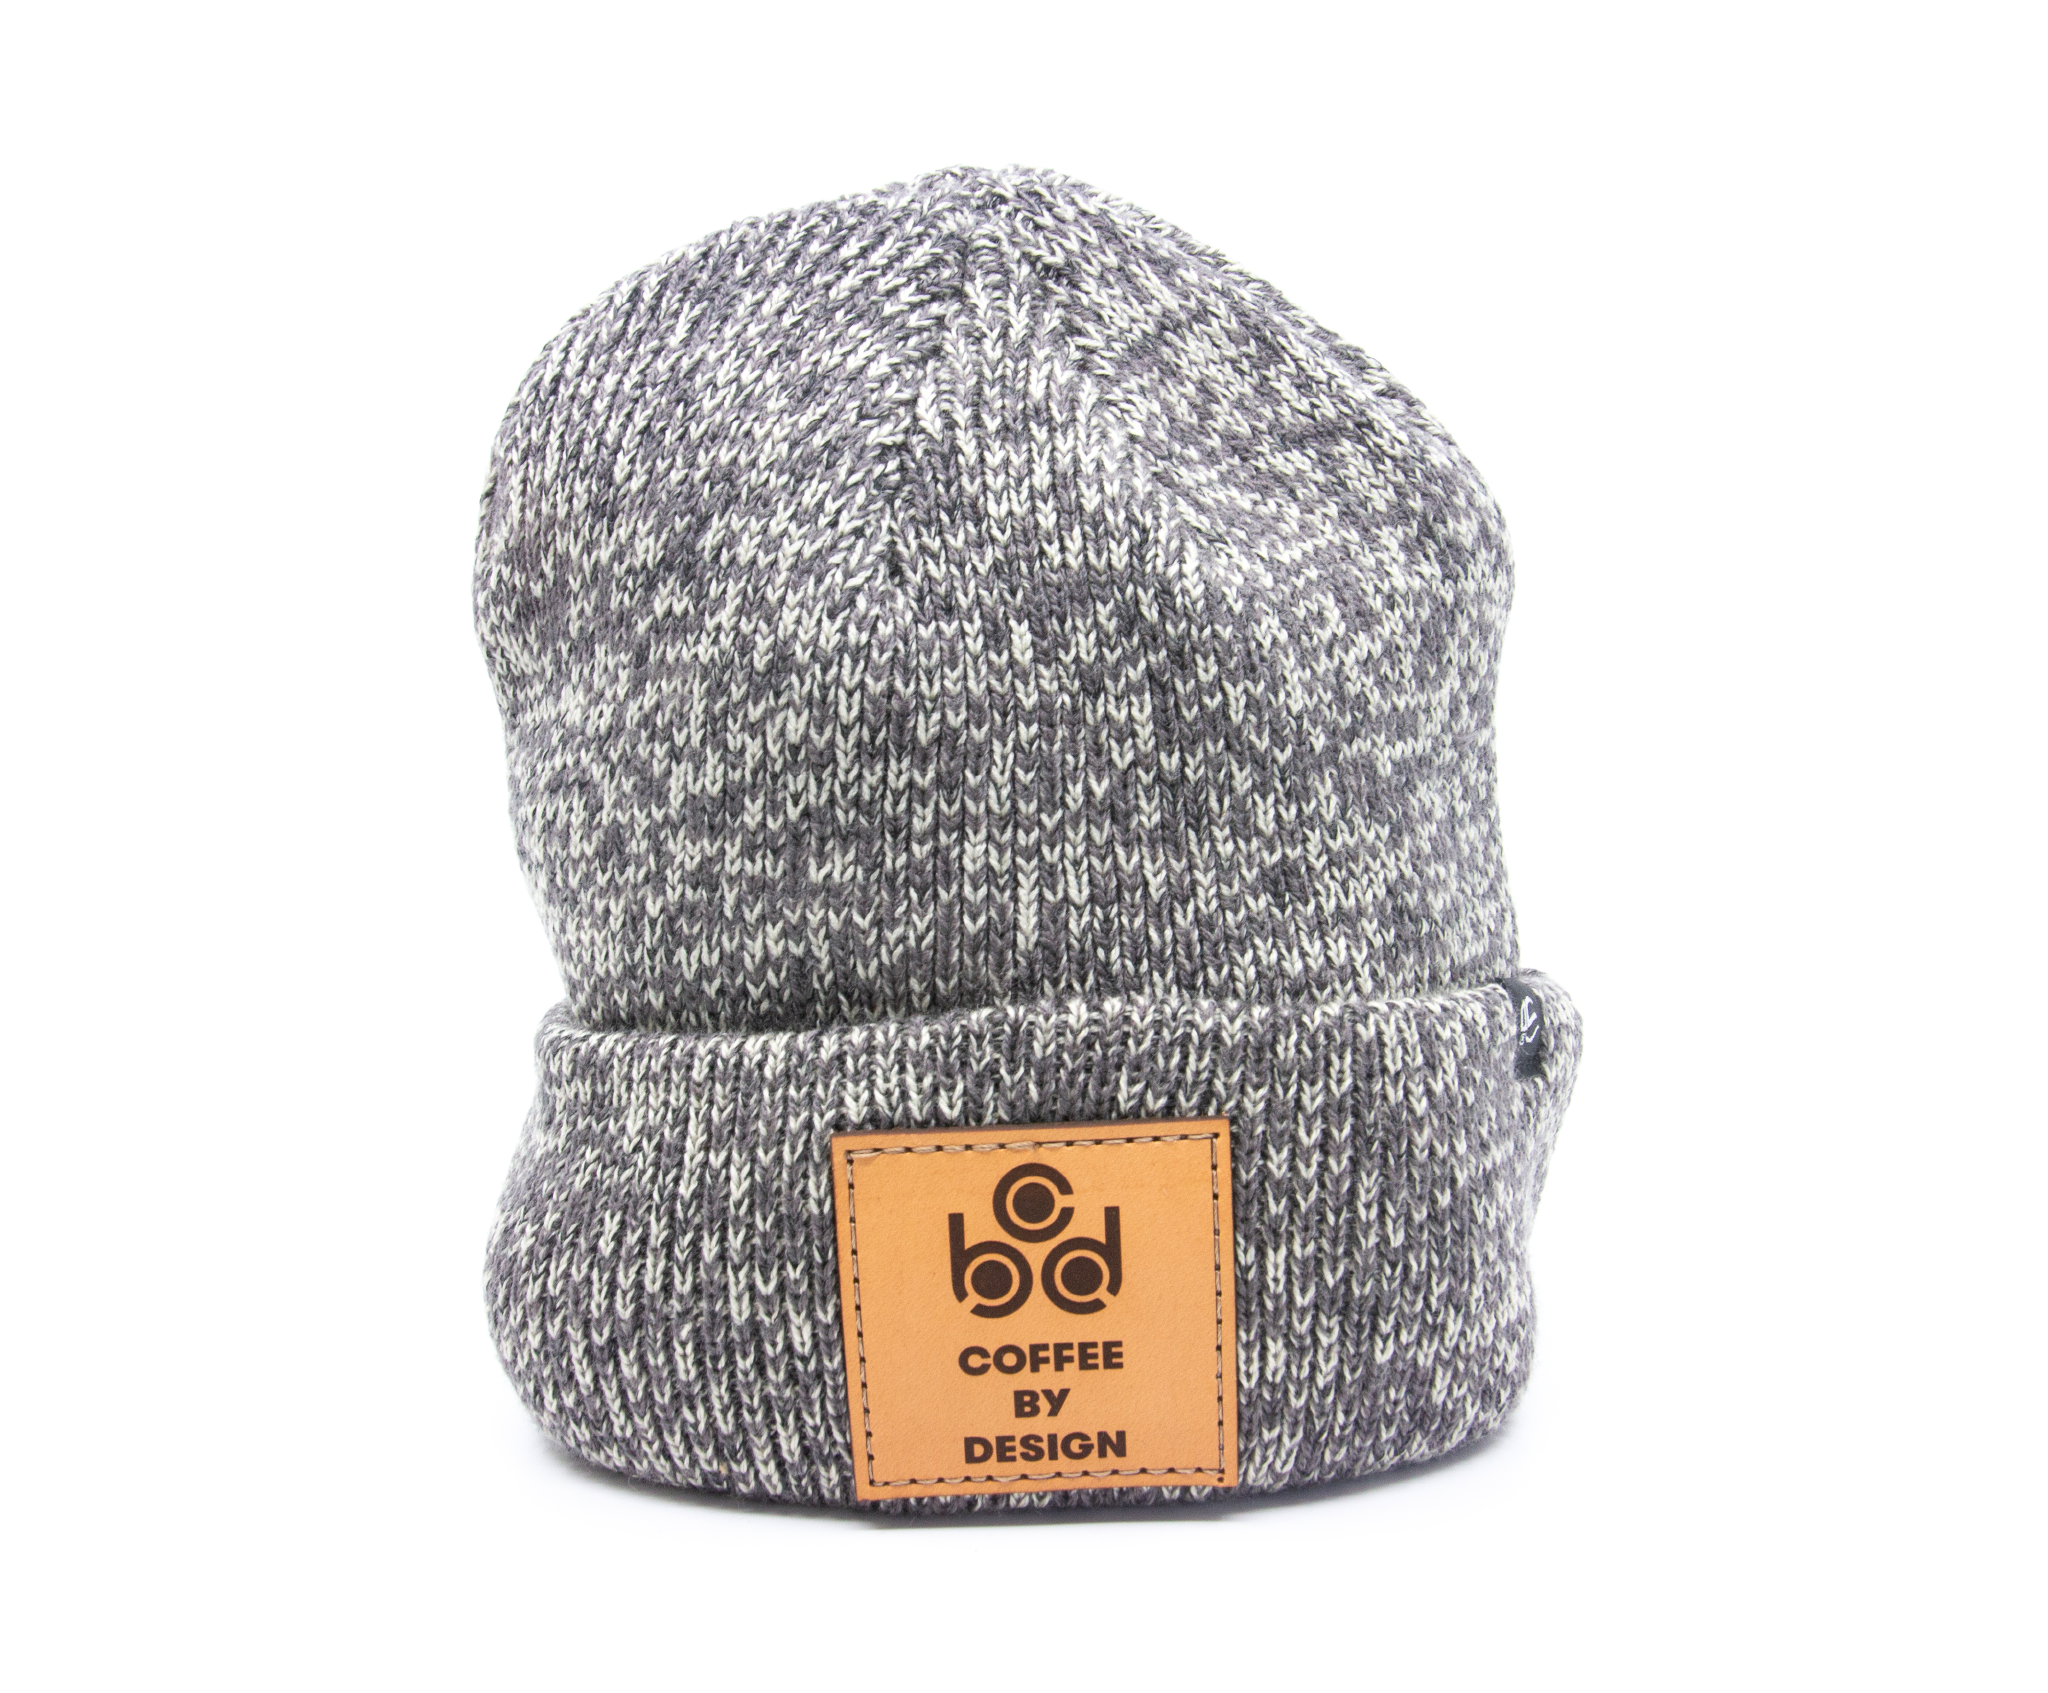 Double Knit Beanies